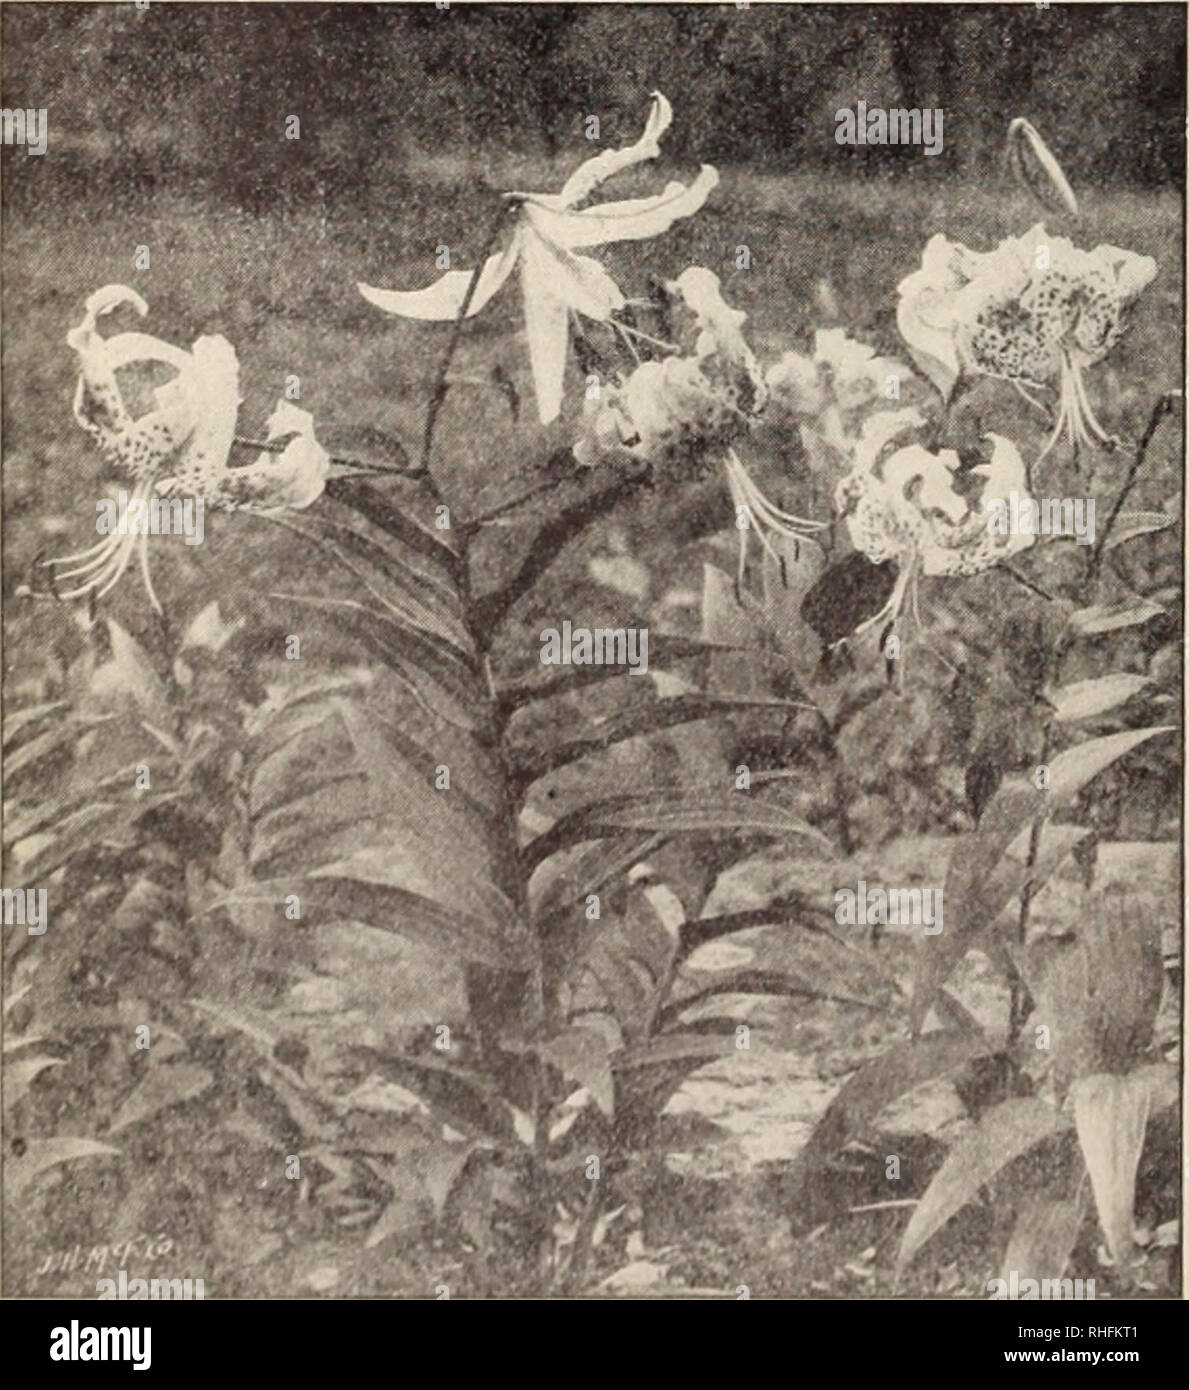 . Boddington's quality bulbs, seeds and plants / Arthur T. Boddington.. Nursery Catalogue. Lilium auratum (type) RARE LILIUM AURATUMS LILIUM AURATUM MACRANTHUM. Another grand type of the (iolden-banded Lily. Large bulbs, 50 cts. each, $4 per doz., S30 per ,000.. Lilium speciosum (typej LILIUM AURATUM PICTUM. A very choice Each Doz. 100 type of Liliiui! auratum ; pure white, with red and j'ellow bands through each petal. Large bulbs ...fo 30 $3 00 $20 00 LILIUM AURATUM PLATYPHYLLUM. A very strong and vigorous type of L. aurahim. Flowers of immense size, pure ivory-white, with a deep golden band Stock Photo